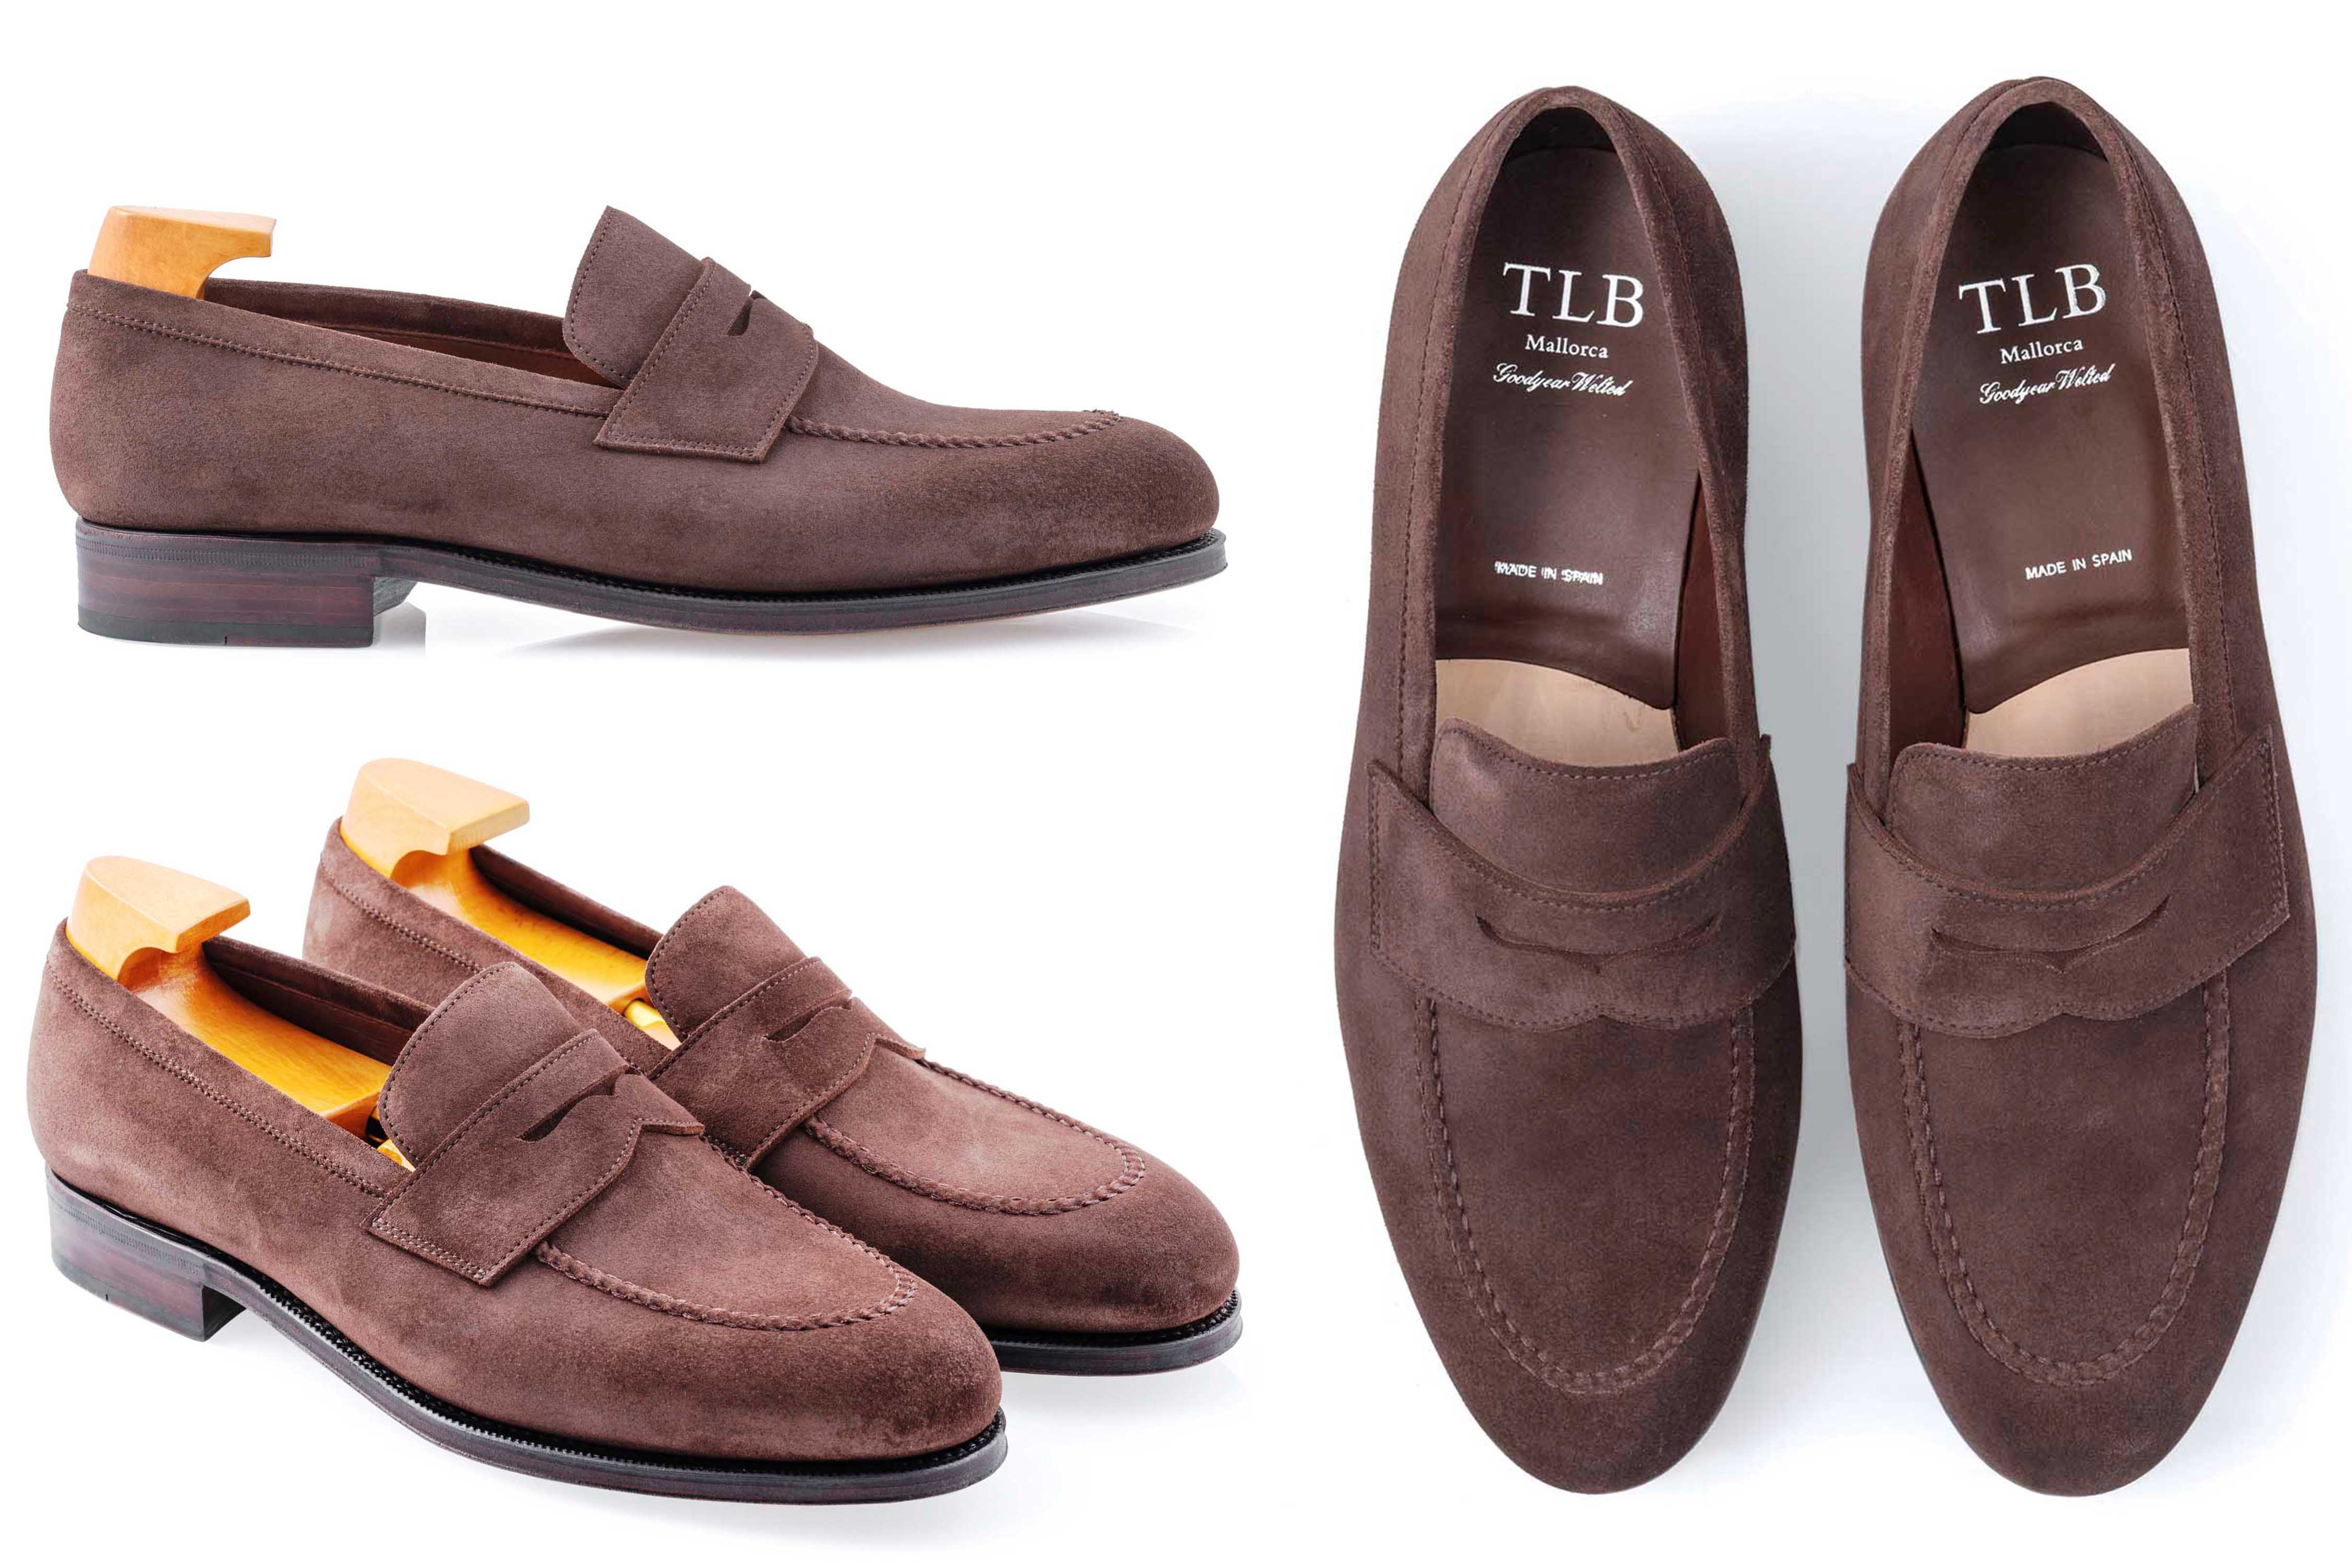 TLB Mallorca shoes MTO - Made to Order